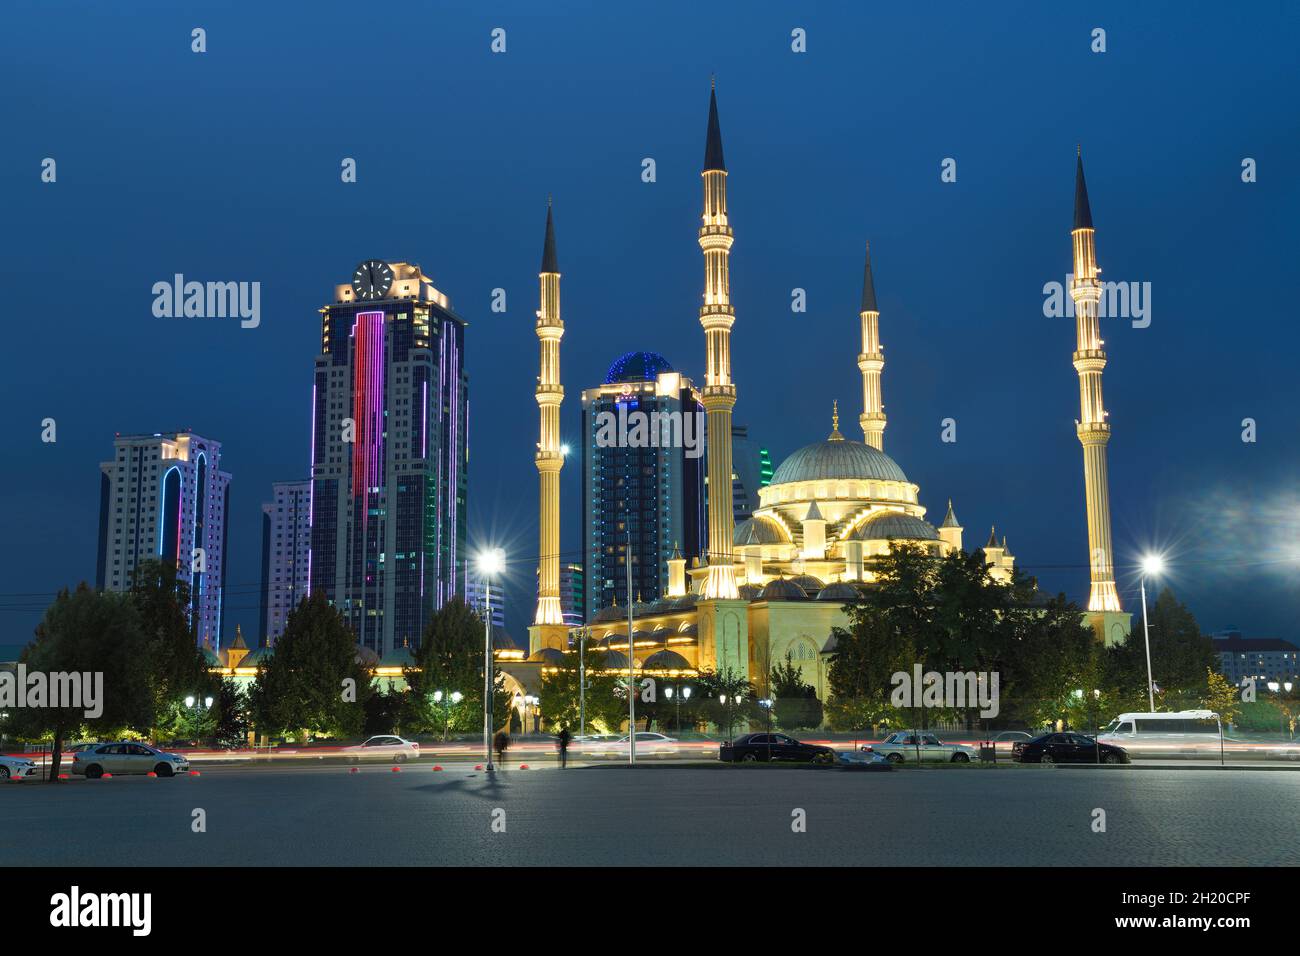 GROZNY, RUSSIA - SEPTEMBER 29, 2021: View of the Mosque 'Heart of Chechnya' and the buildings of the modern business center 'Grozny City' Stock Photo